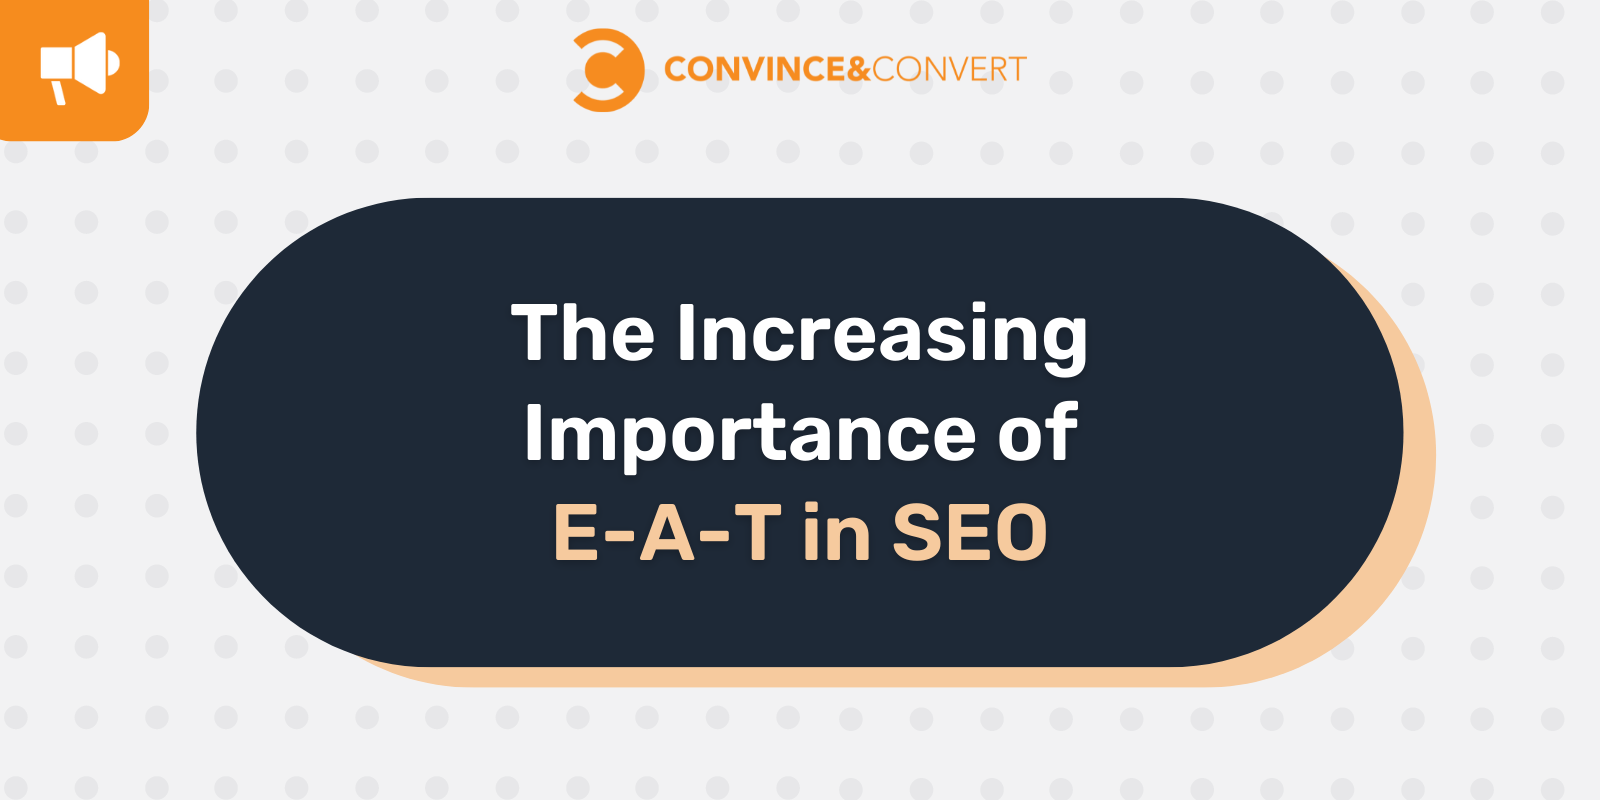 The Increasing Importance of E-A-T in SEO